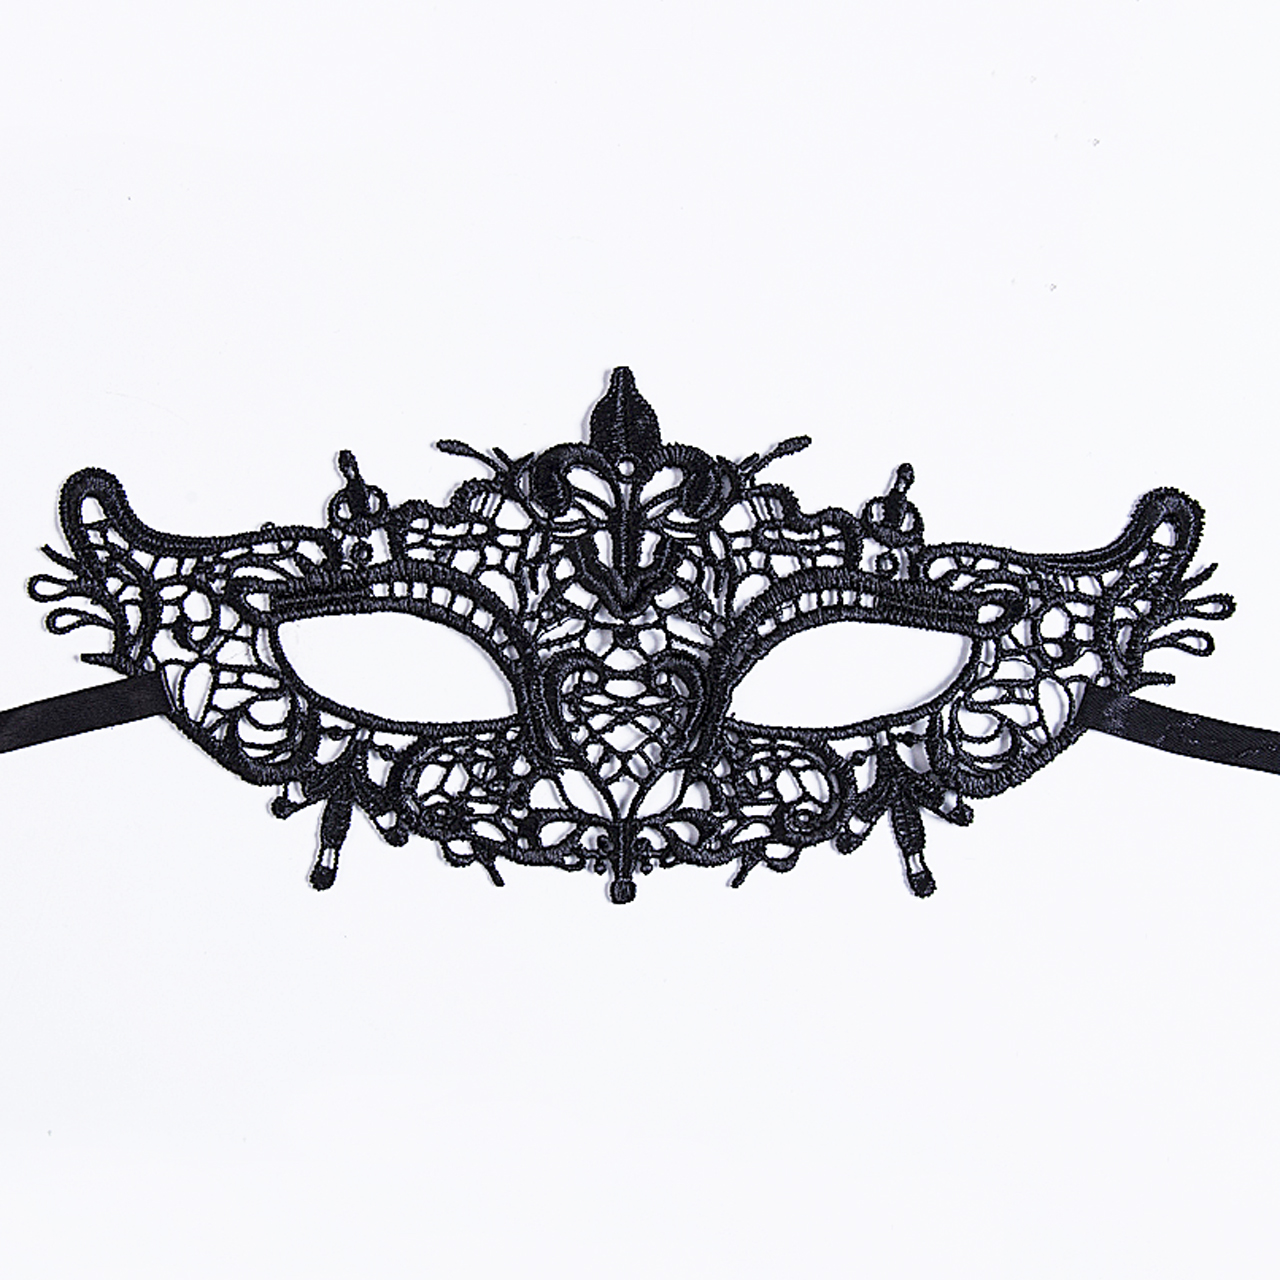 Sexy Women Lace Eye Mask Masquerade Ball Prom Halloween Costume Play Accessories